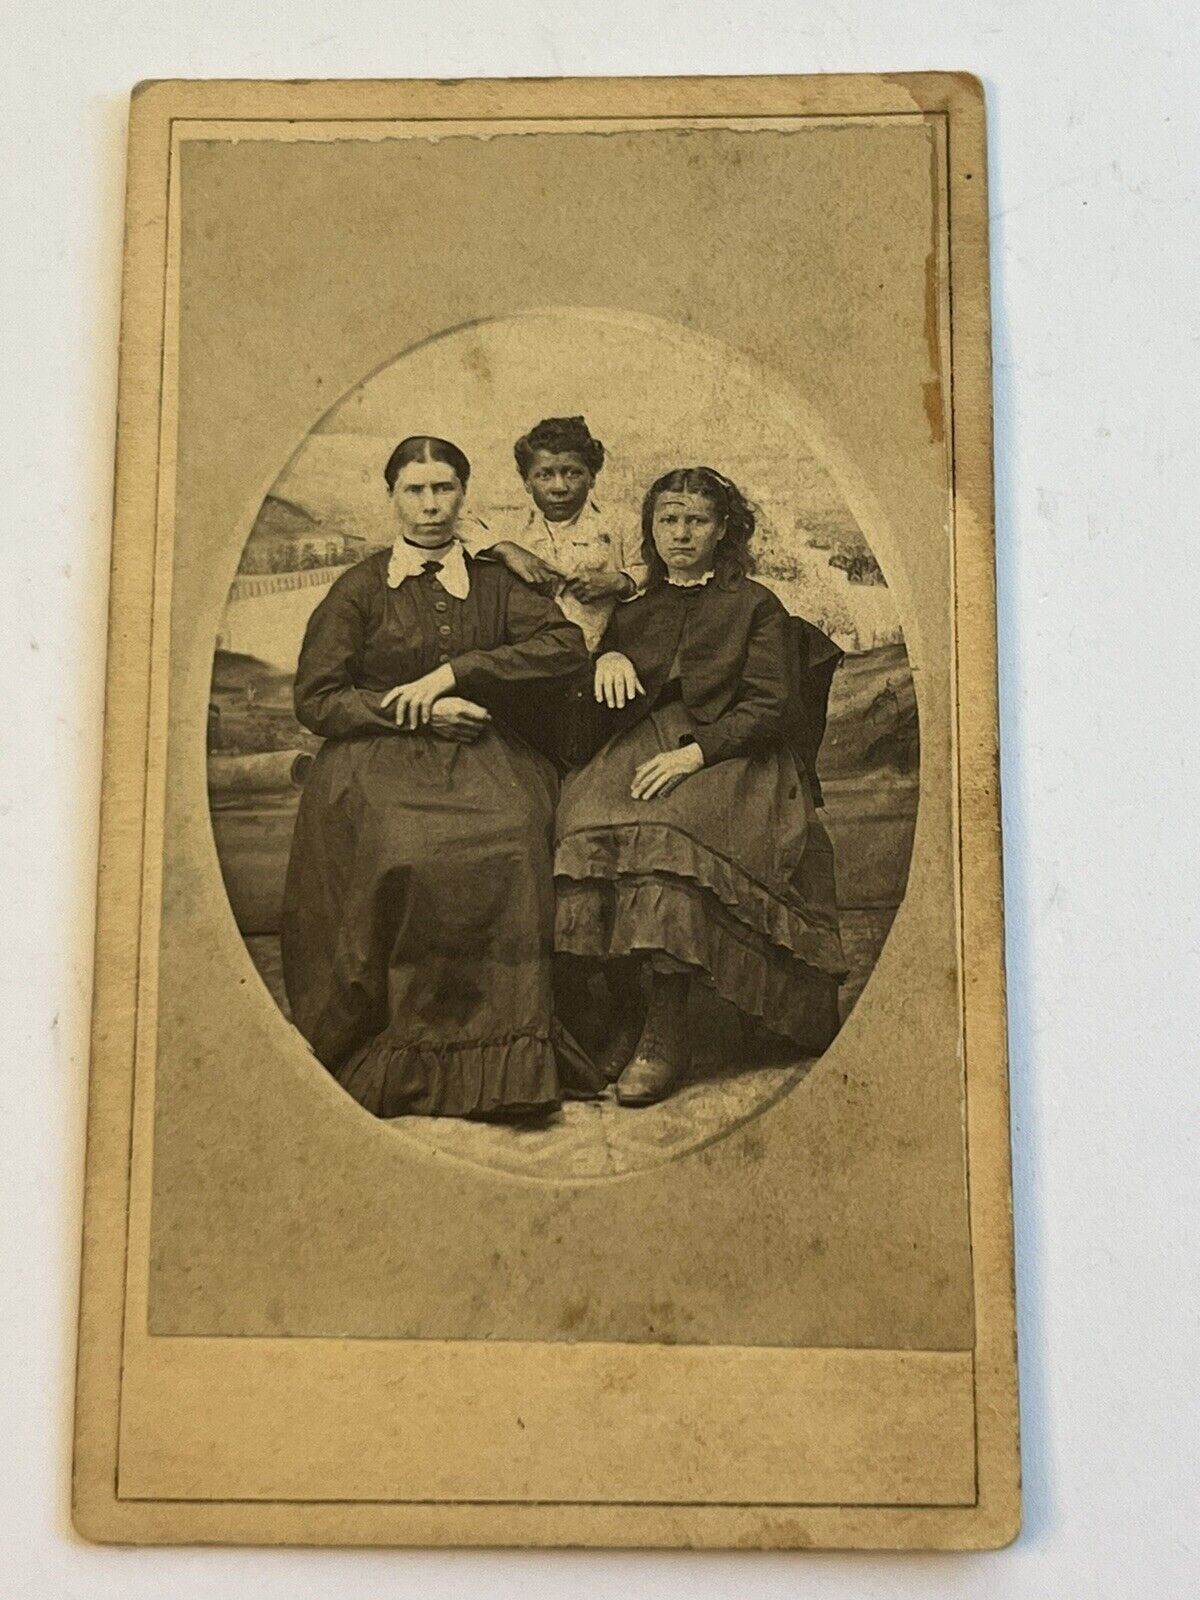 X RARE 1869 CDV PHOTO of 3 WOMEN /1 AFRICAN AMERICAN WOMAN/SLAVE/in POSED SEAT